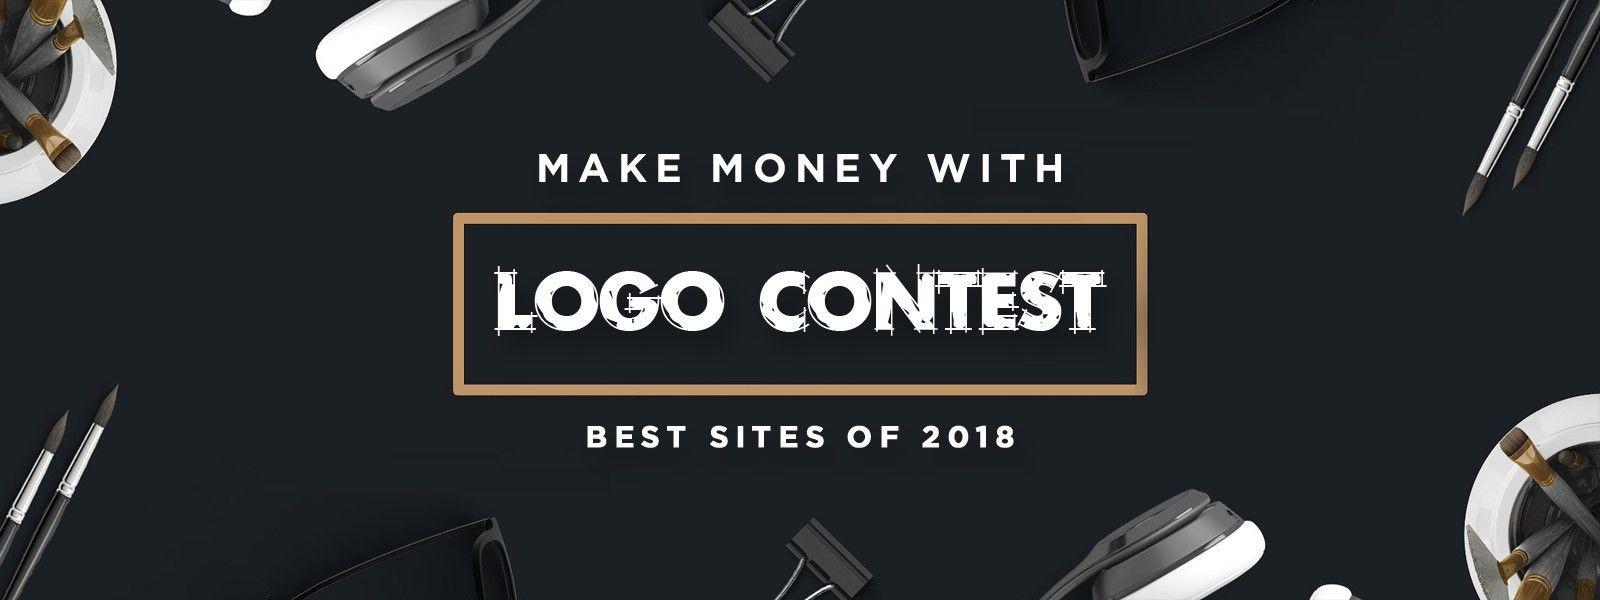 Contest Logo - Best Websites & Tips (Easy to Follow) to Win Logo Design Contest